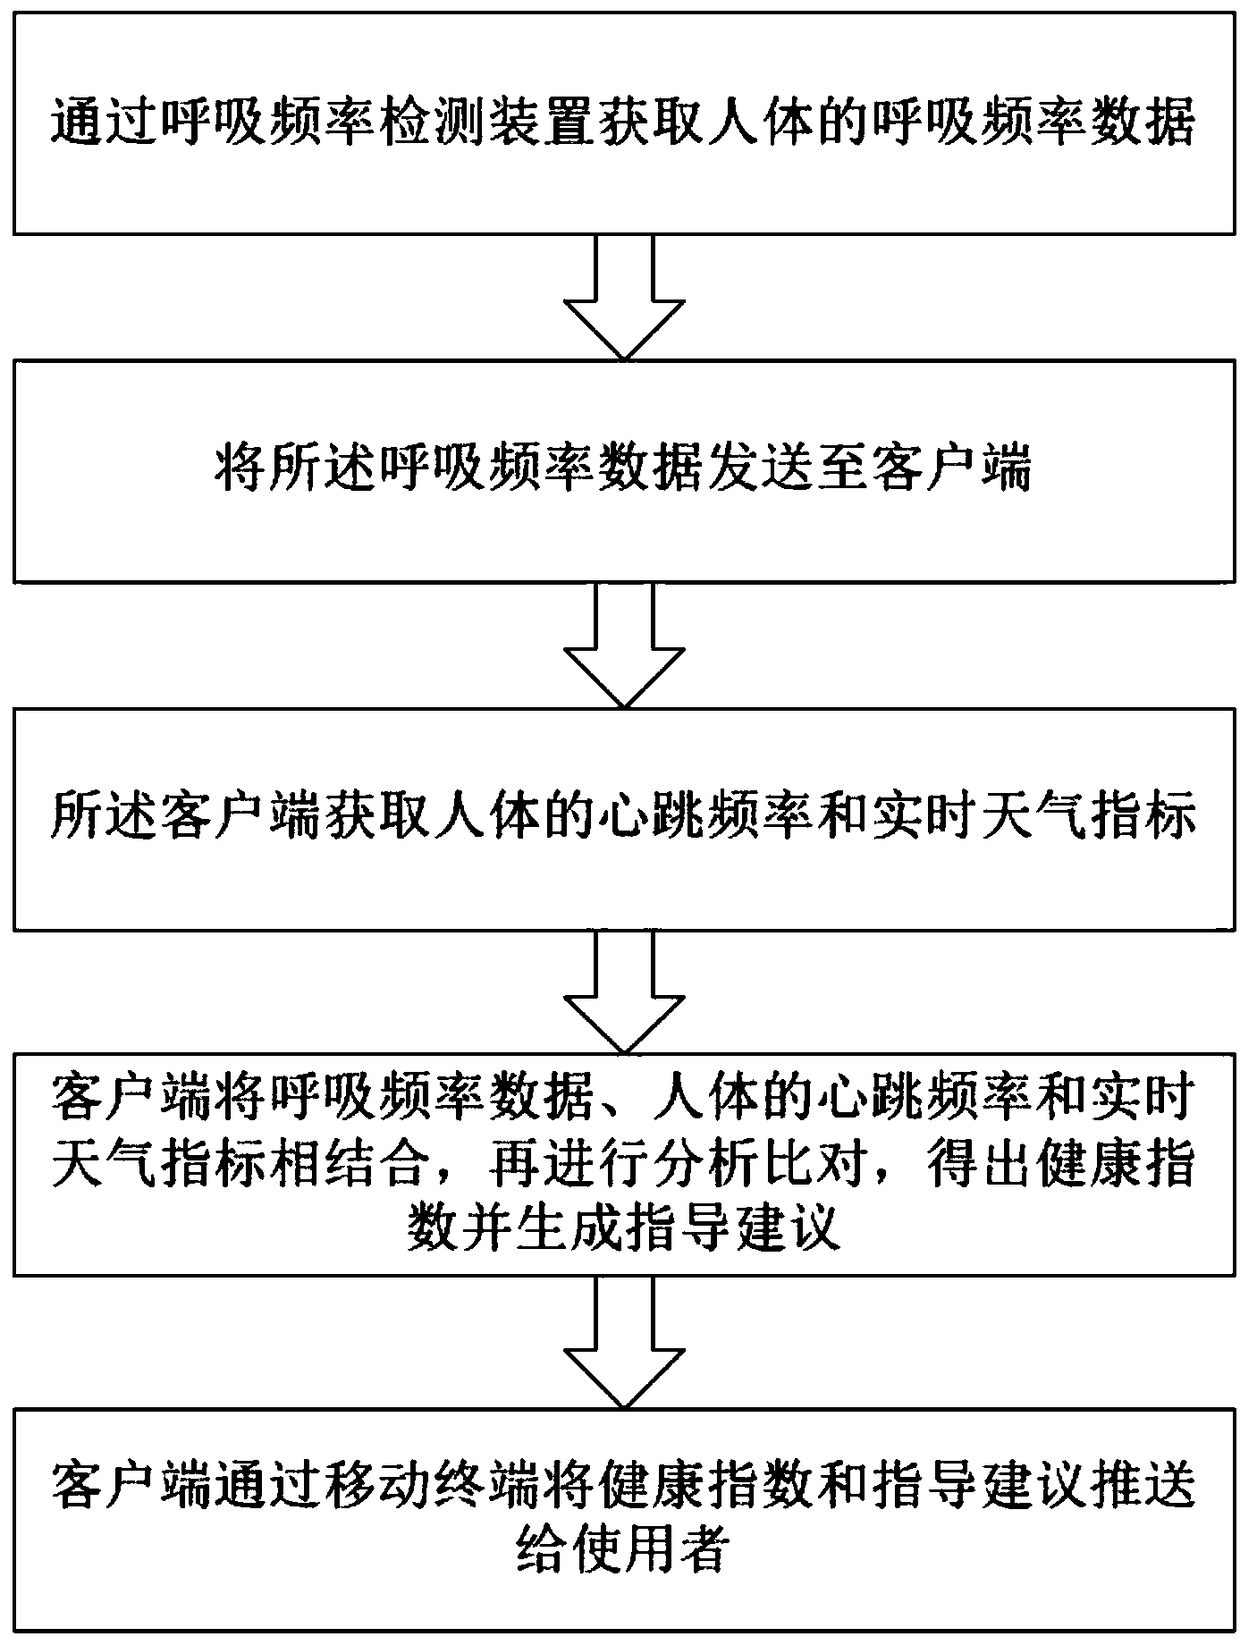 Health monitoring method and system based on respiratory rate index